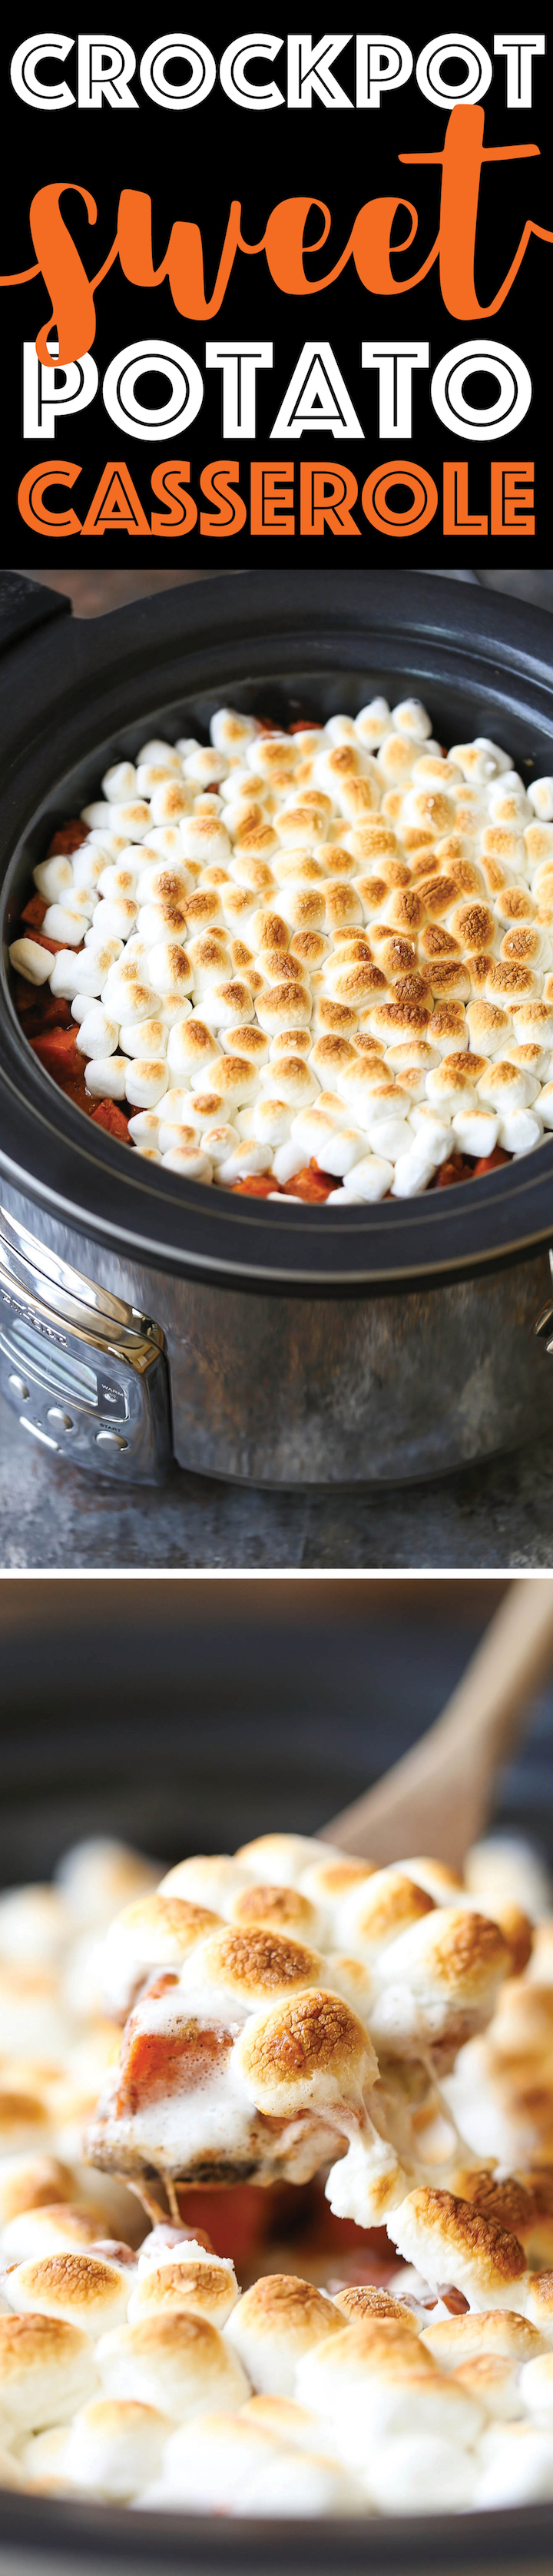 Slow Cooker Sweet Potato Casserole - That ooey gooey marshmallow topping!!!! All made in a crockpot. So easy without taking any oven space. Double win!